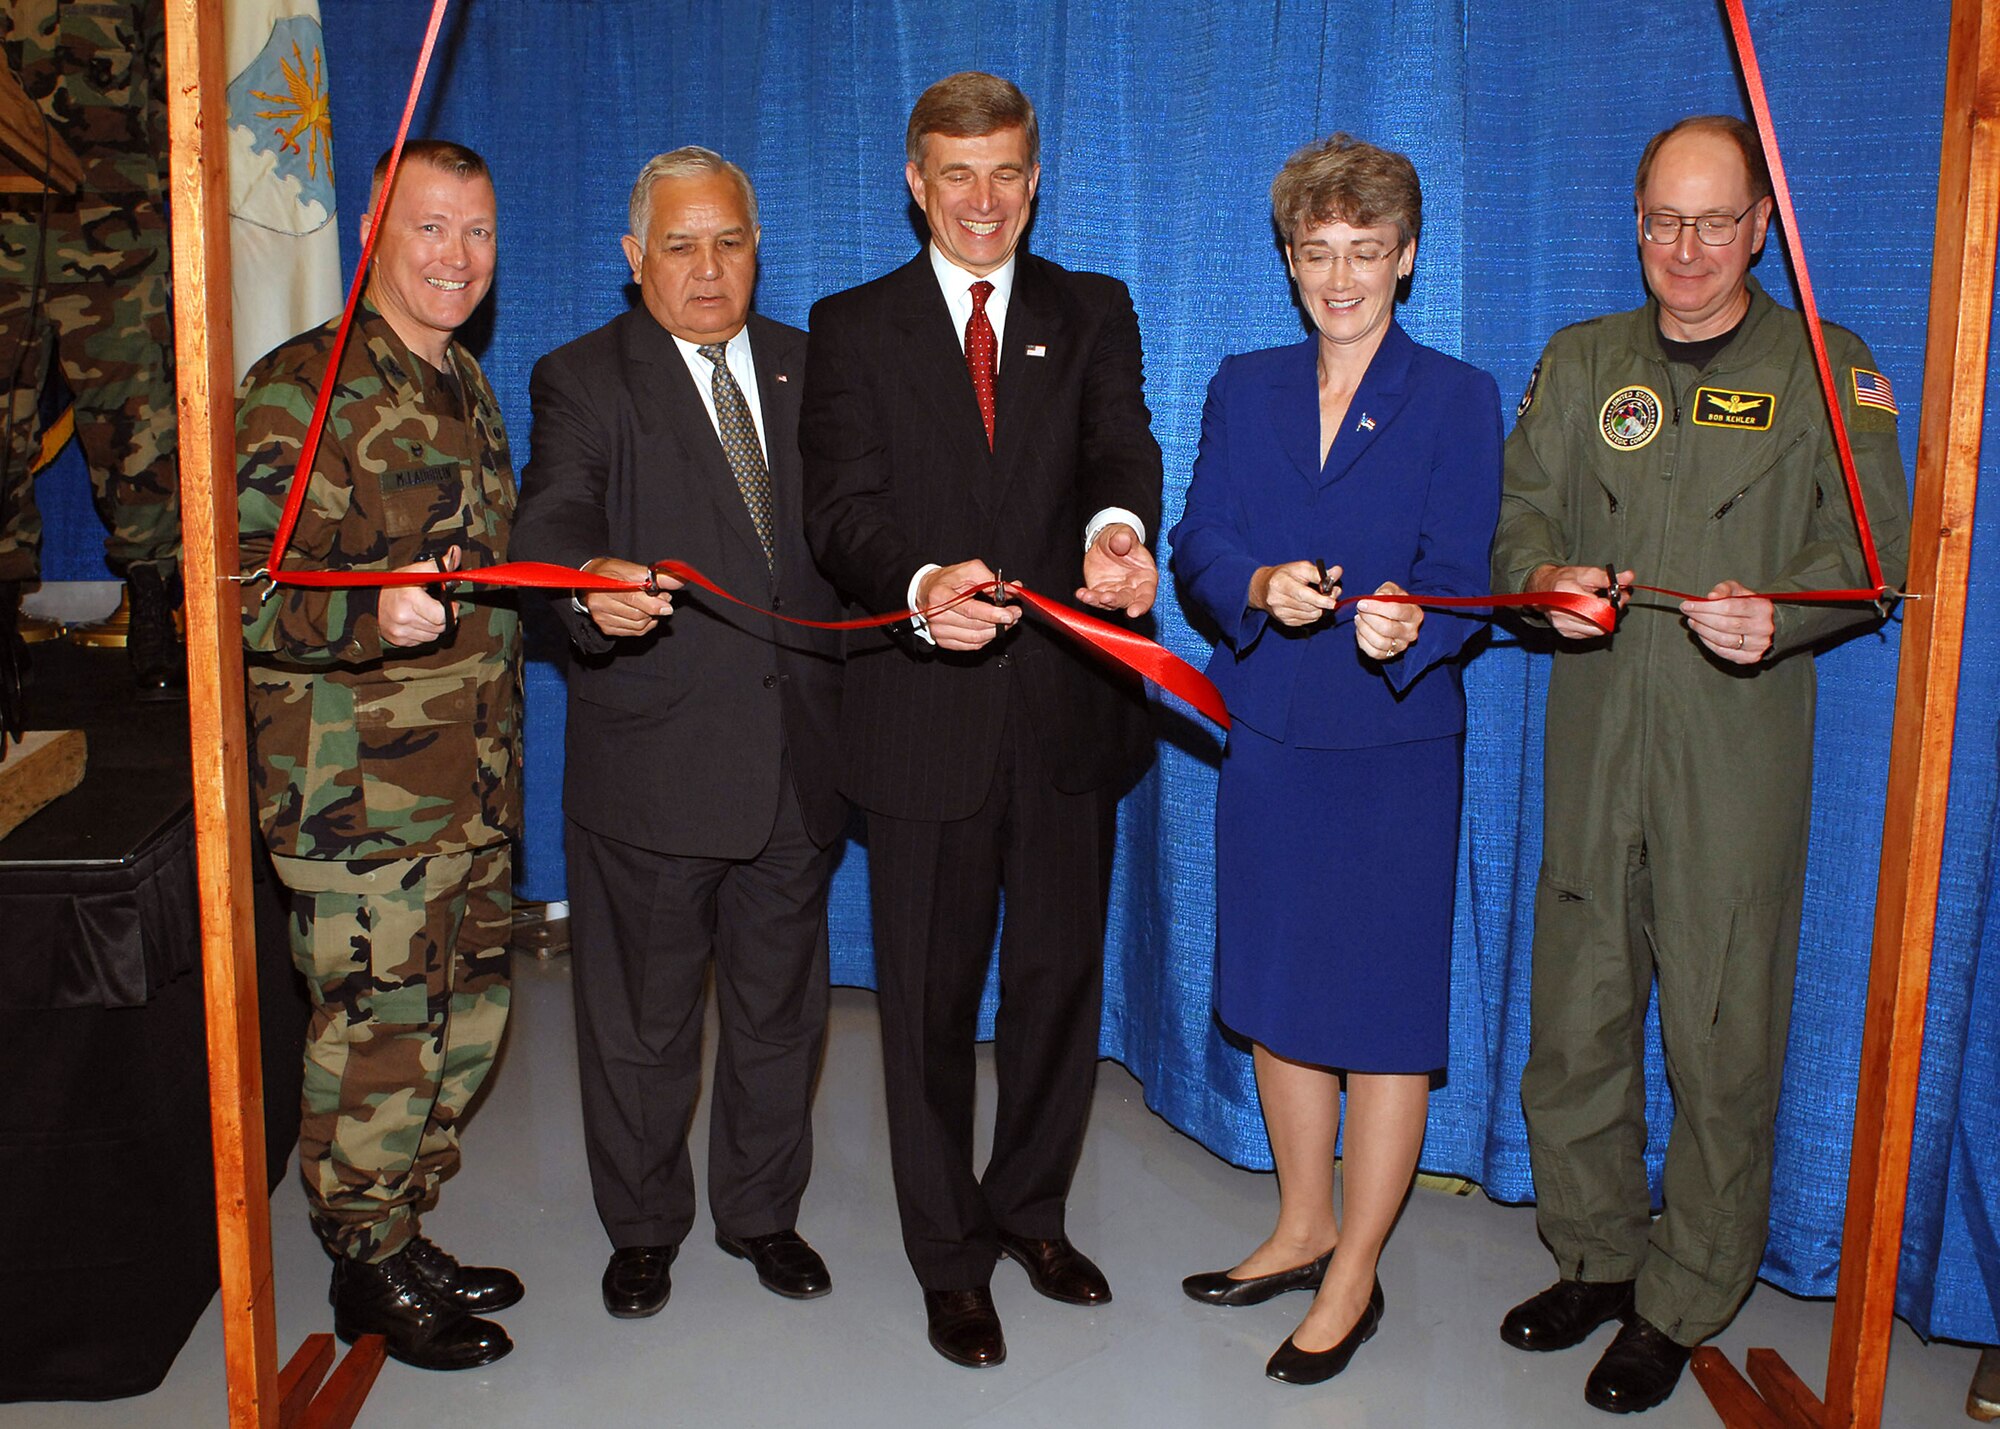 Col. Kevin McLaughlin (left to right), Rep. Silvestre Reyes, Dr. Ronald M. Sega, Rep. Heather Wilson, and Lt. Gen. C. Robert Kehler cut the ribbon for the new joint Operationally Responsive Space Center May 21 at Kirtland Air Force Base, N.M. Colonel McLaughlin is the ORS Office director, Dr. Sega is the Department of Defense's executive agent for space and under secretary of the Air Force, and General Kehler is the U.S. Strategic Command deputy commander. (U.S. Air Force photo/Todd Berenger)